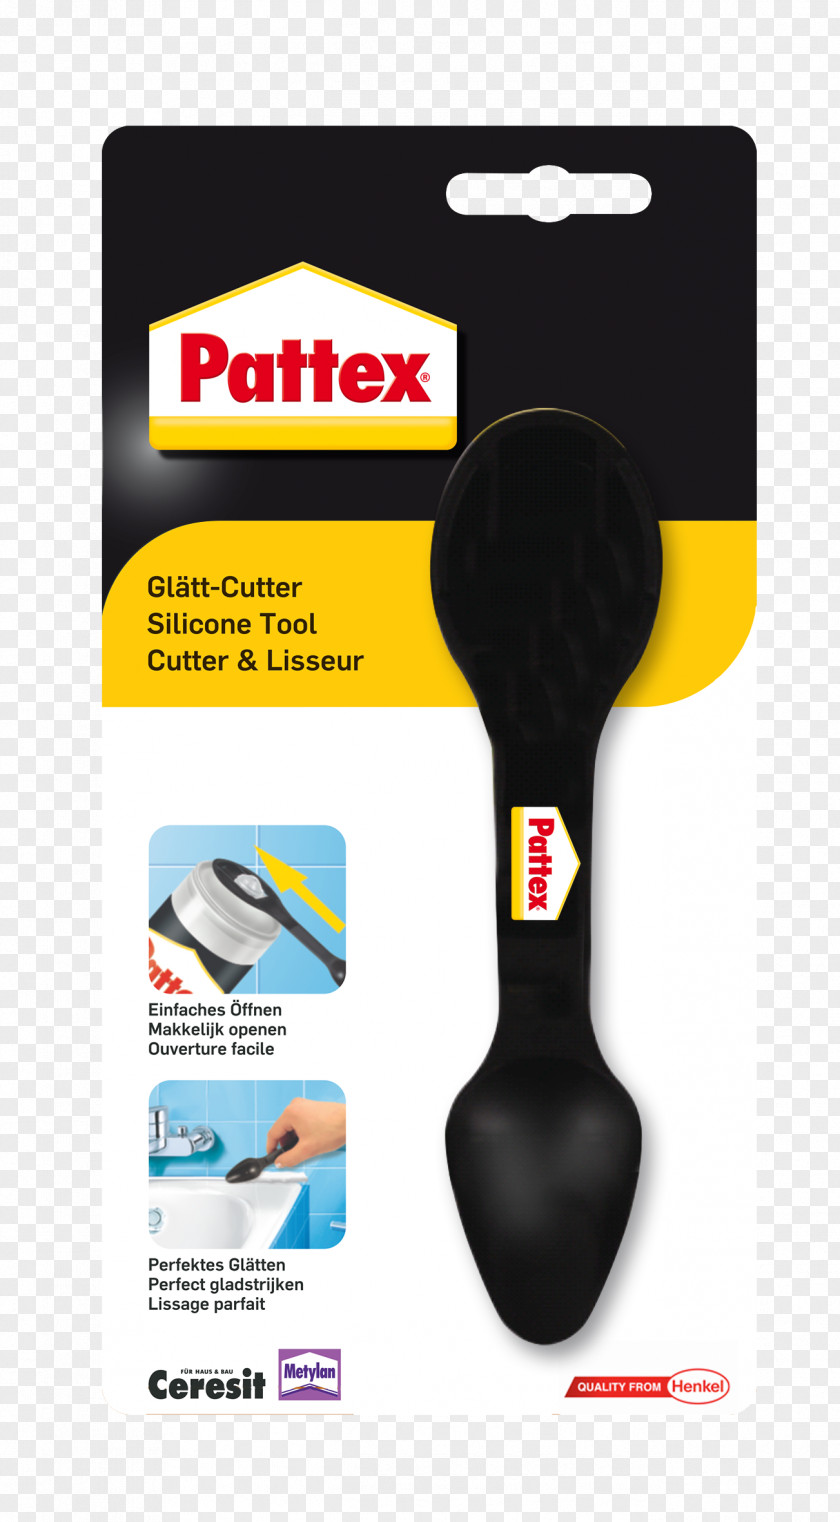 Chapéu De Palha Silicone Pattex Putty Adhesive Tool PNG